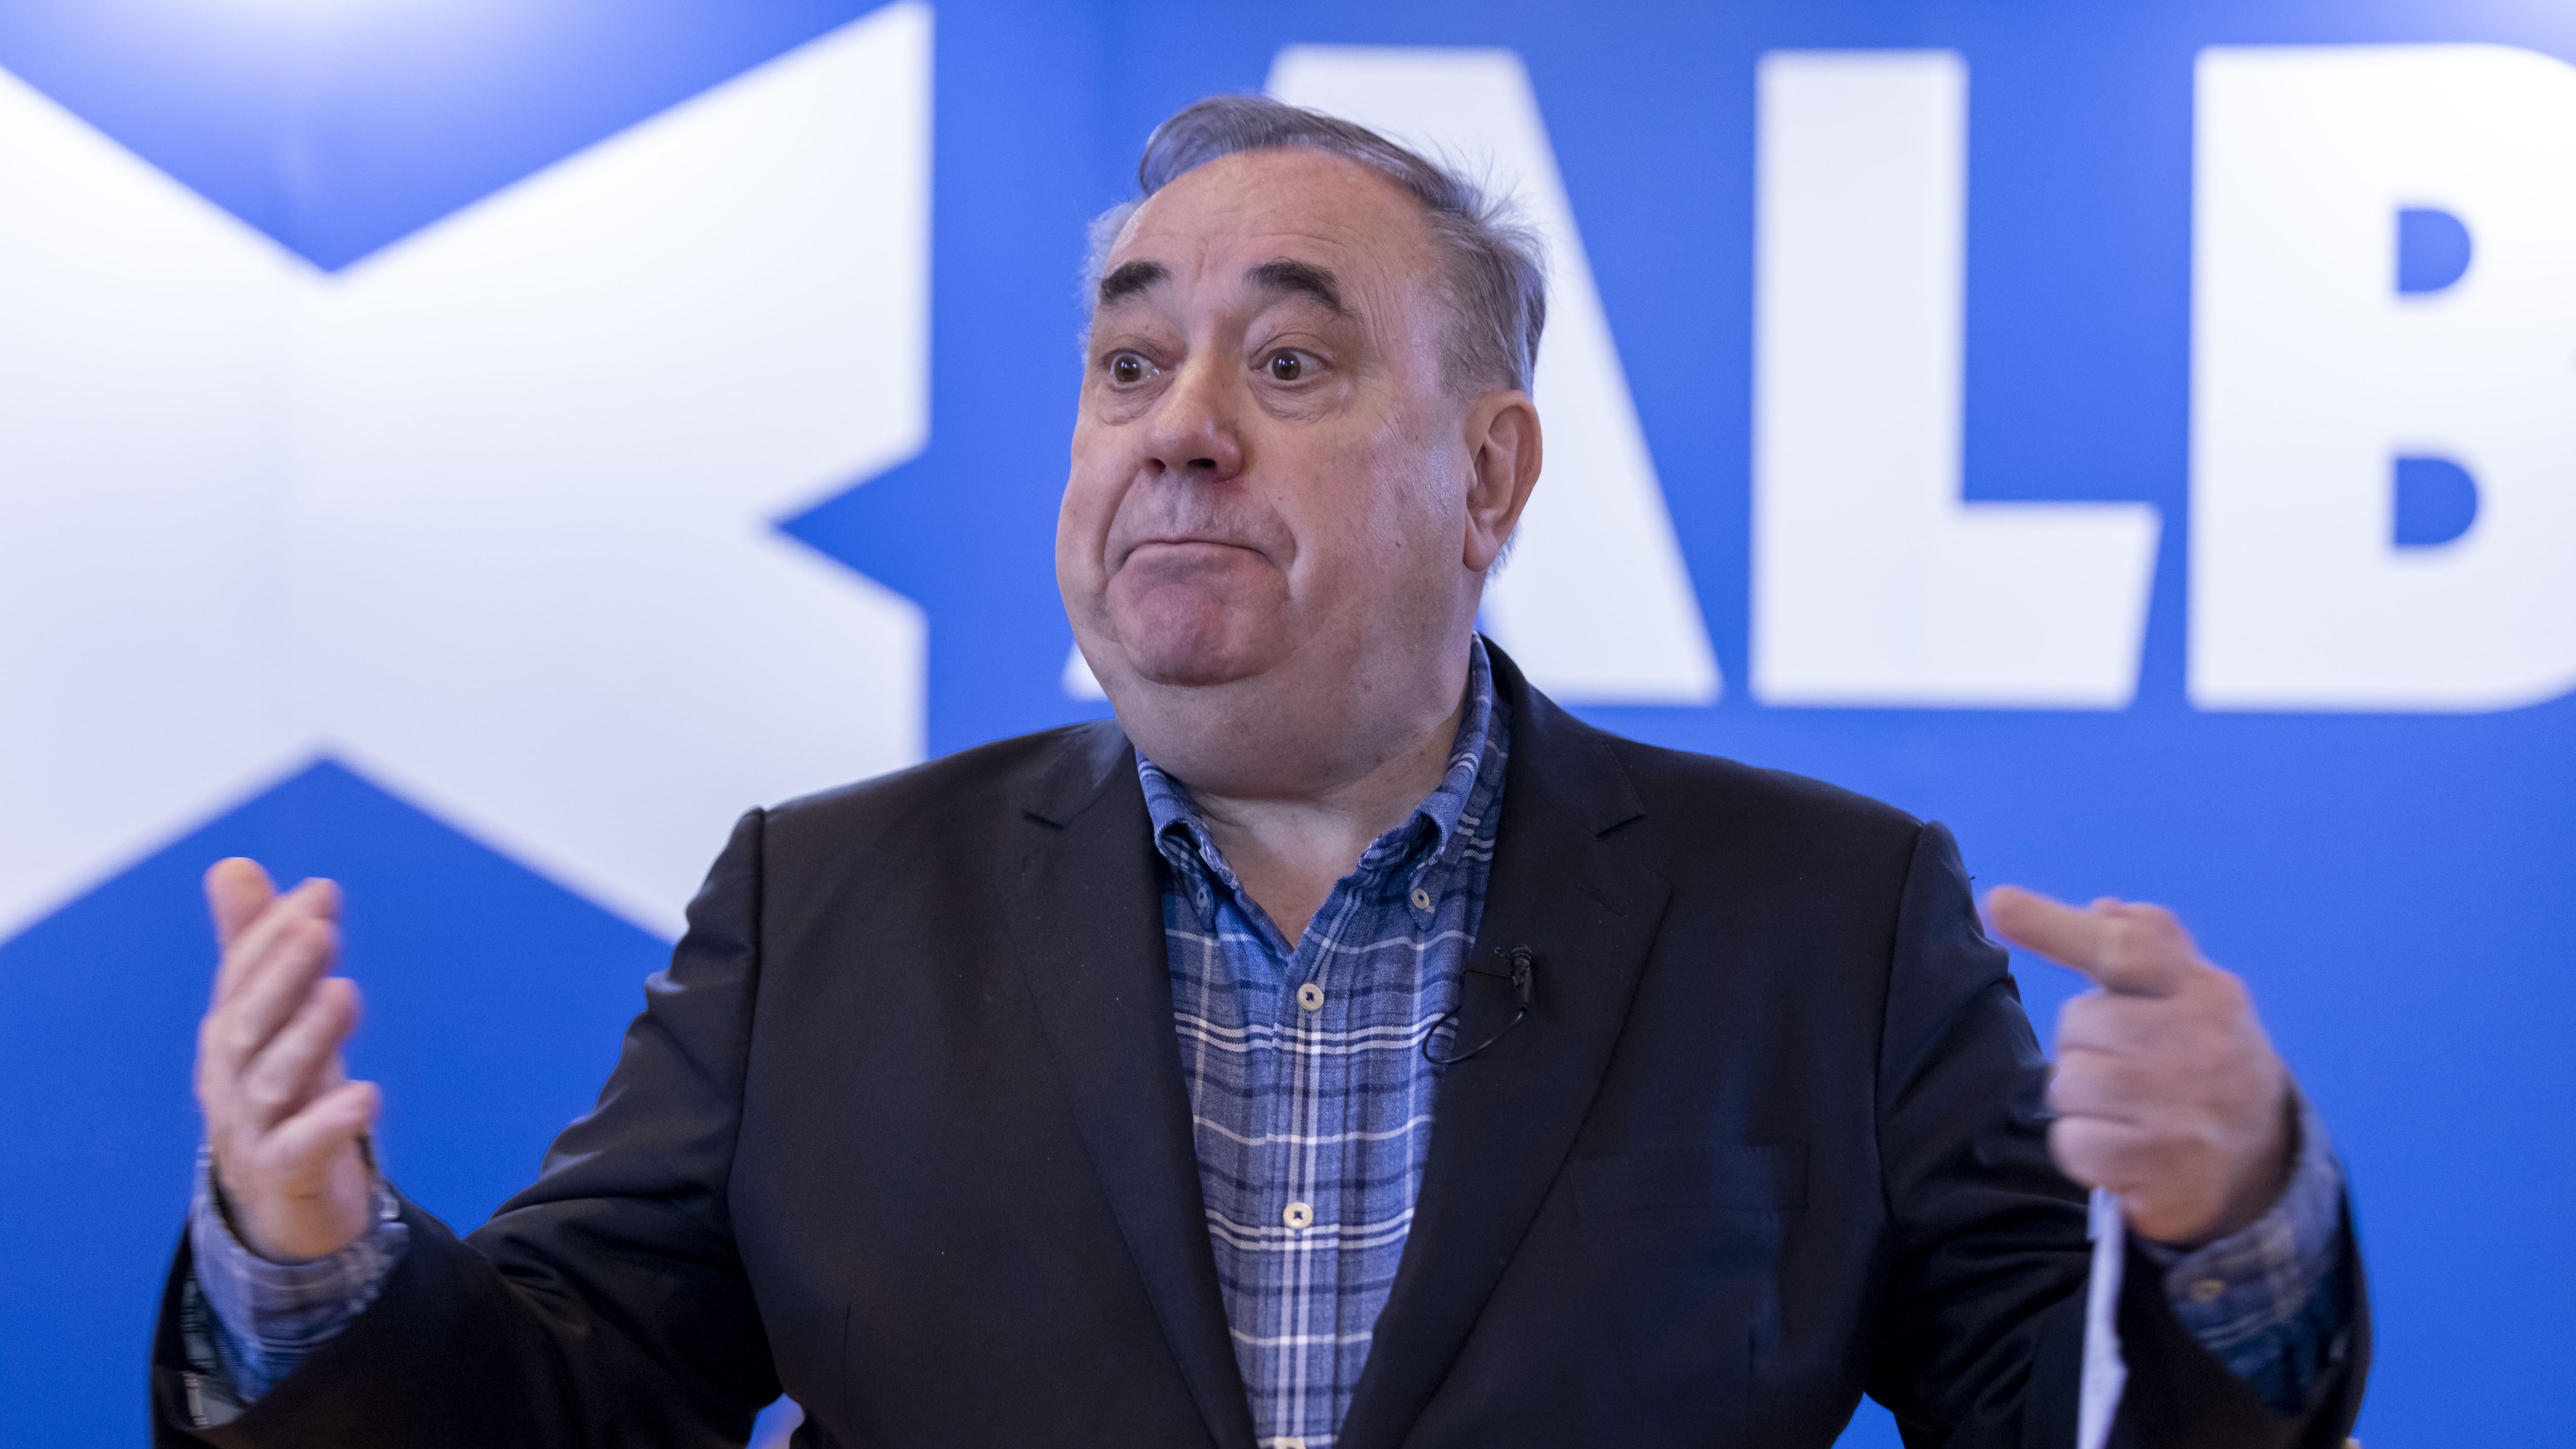 The Alba leader launched the party’s manifesto on Wednesday